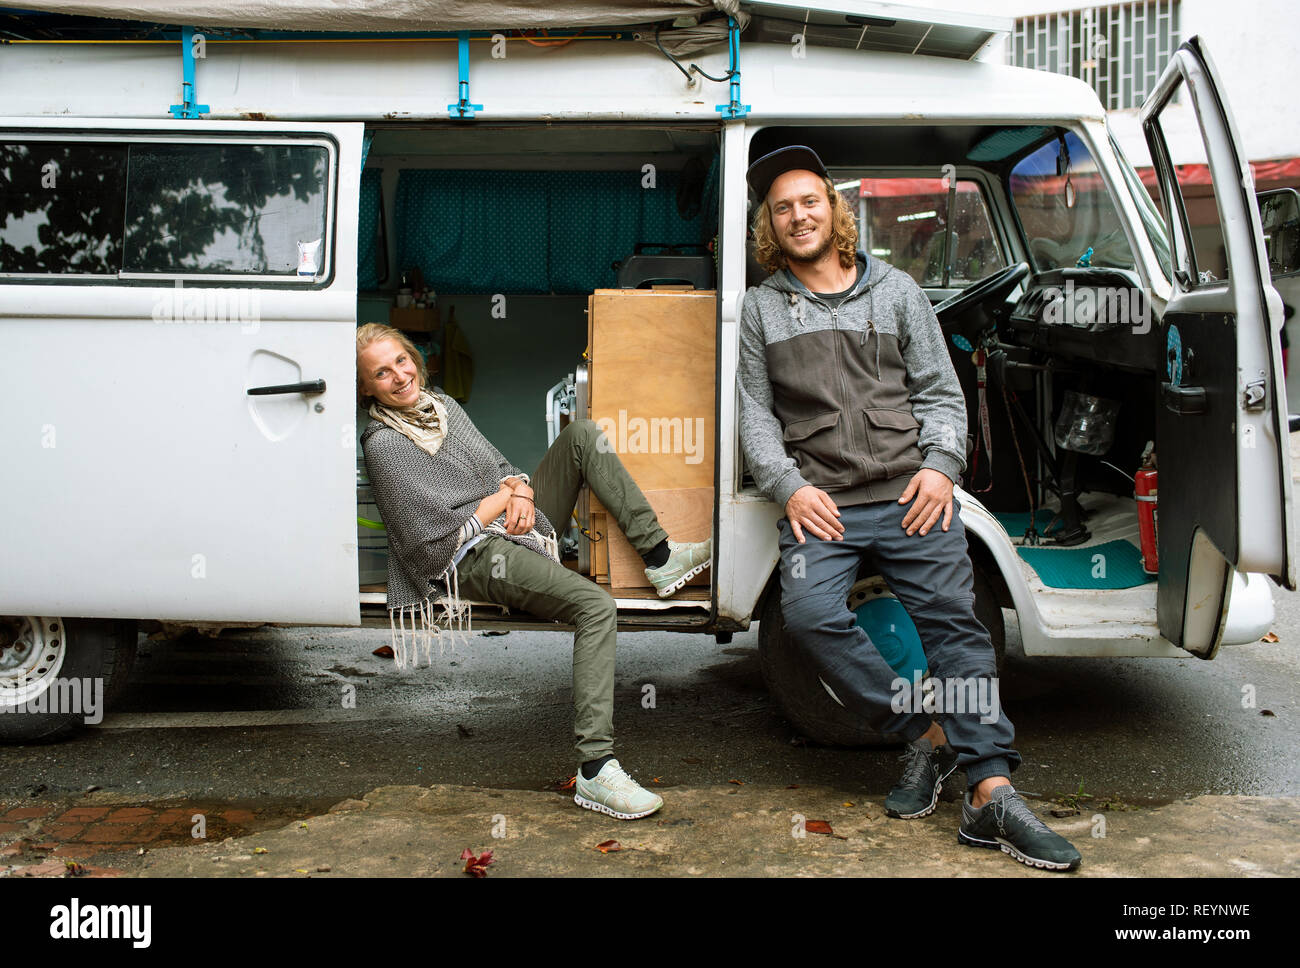 Volkswagen Camper van with a happy European travelling couple. Travel lifestyle (environmental portrait, editorial use). Medellín, Colombia. Sep 2018 Stock Photo